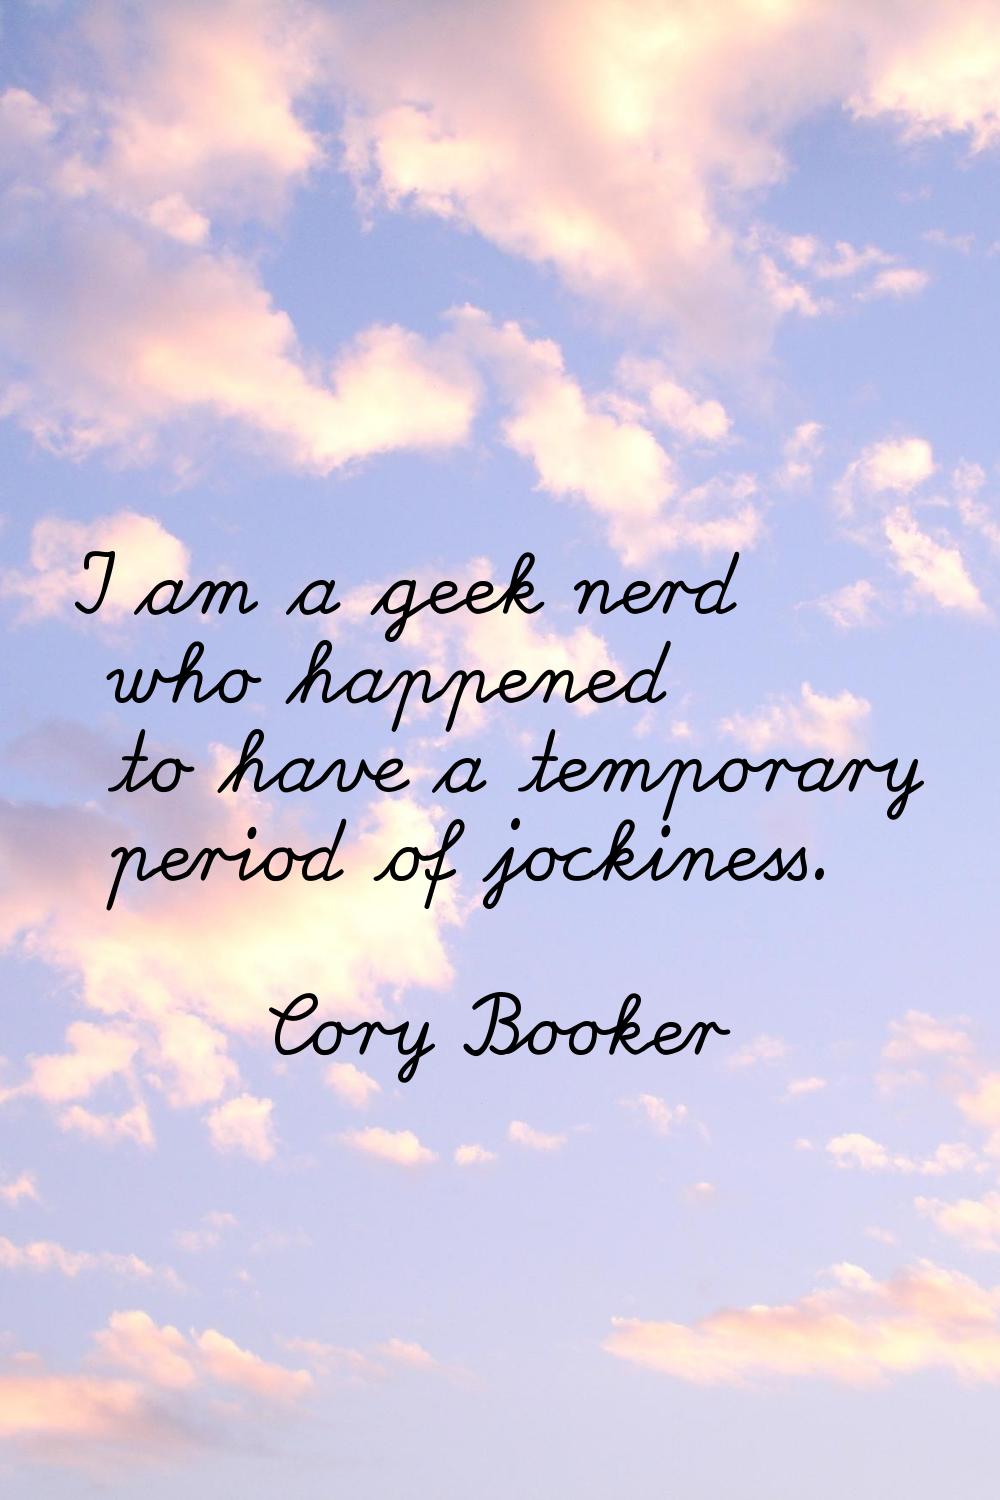 I am a geek nerd who happened to have a temporary period of jockiness.